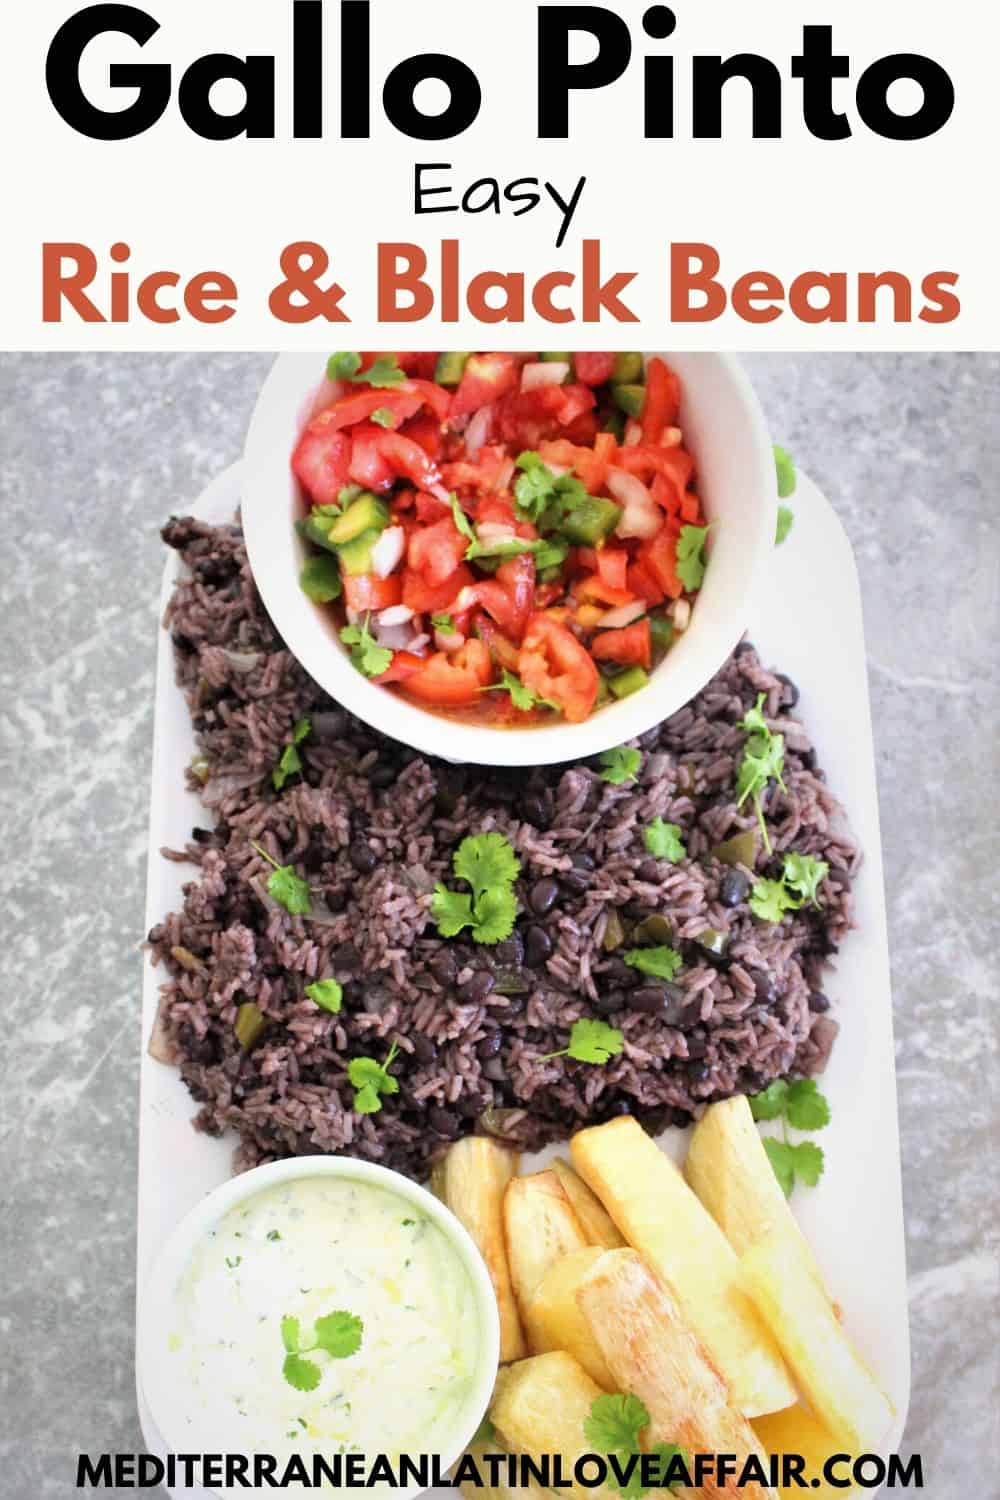 A platter of rice and black beans, shown with a tomato side dish and fried yucca with a yogurt dip. 